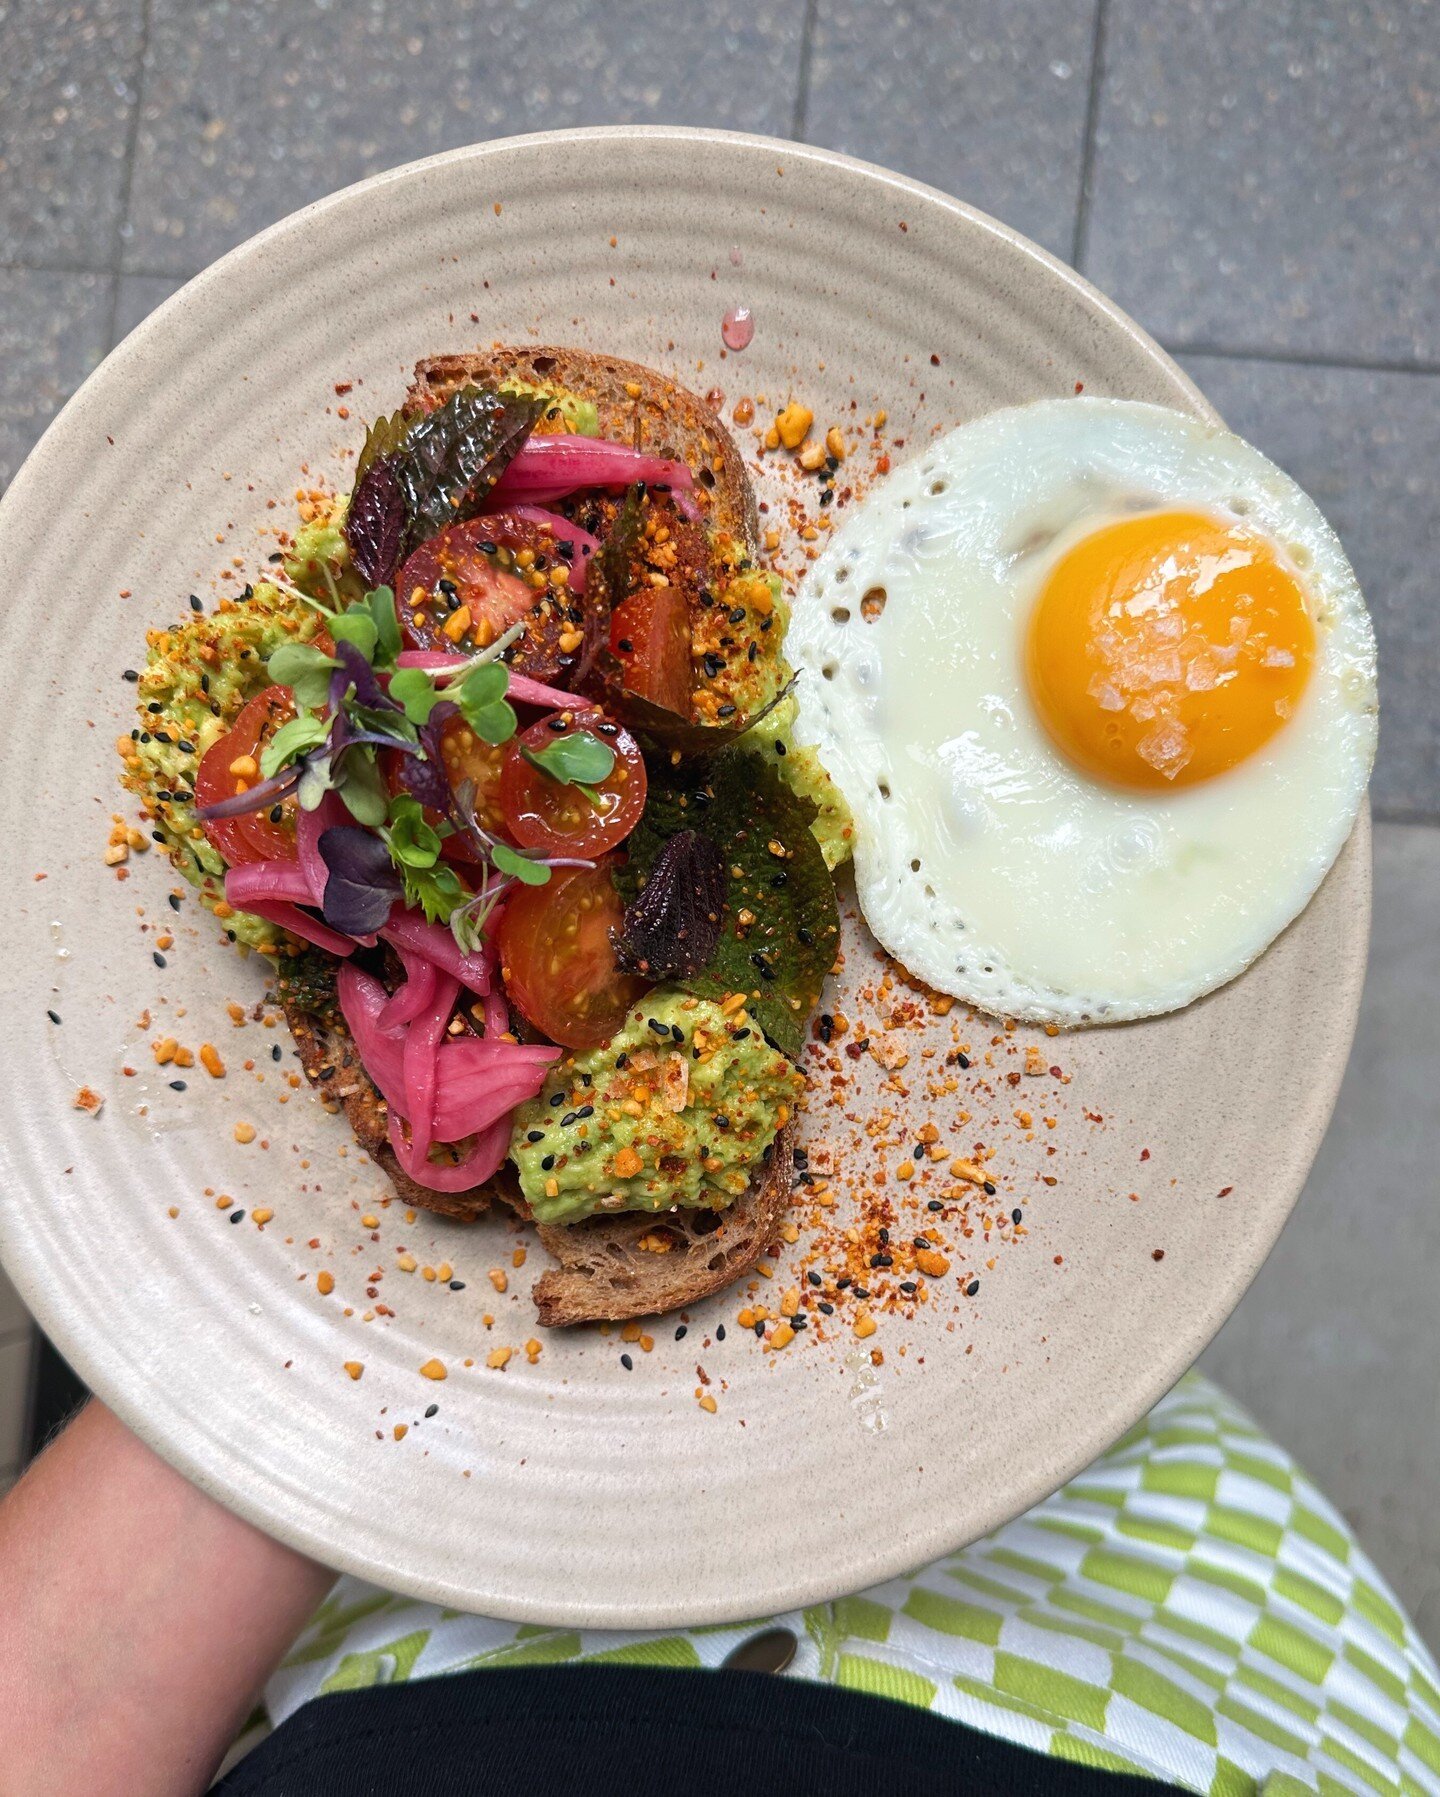 Do you even avo? Ours is smashed on rye with heirloom tomatoes, shiso, pickled onion, aleppo pepper &amp; almond furikake. On all day.